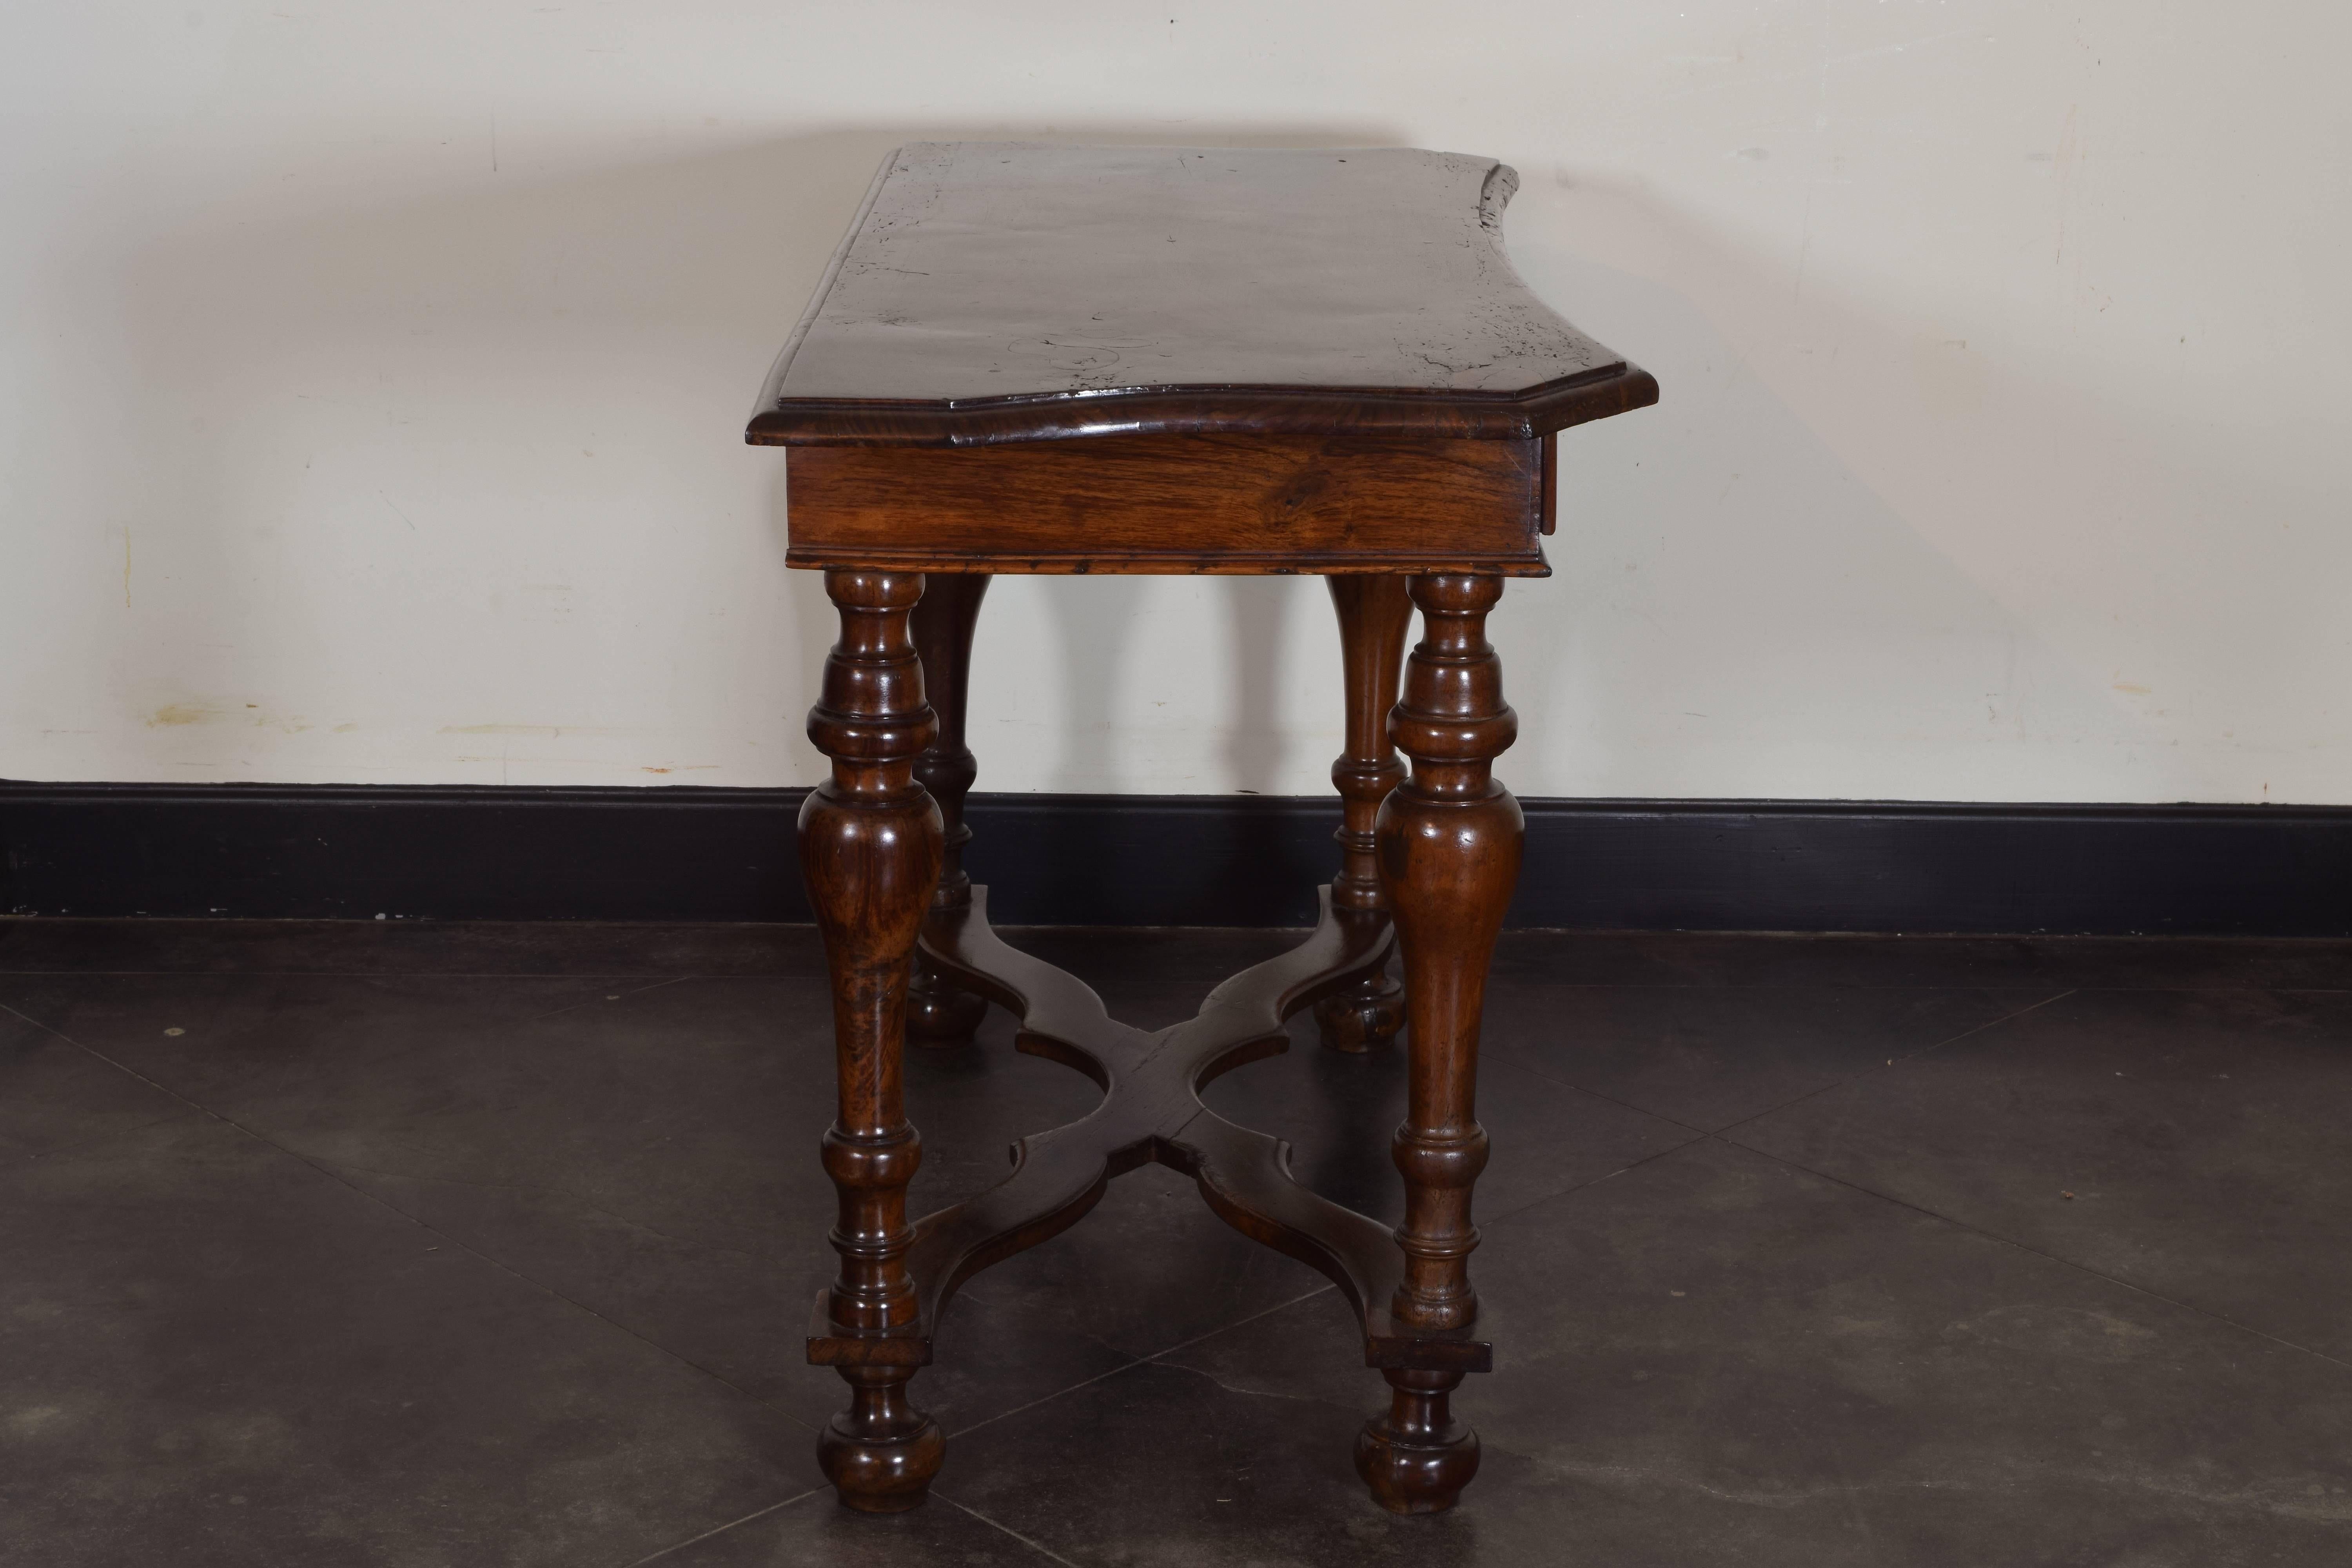 Late 17th Century Italian Late Baroque Walnut Console Table, Late 17th-Early 18th Century